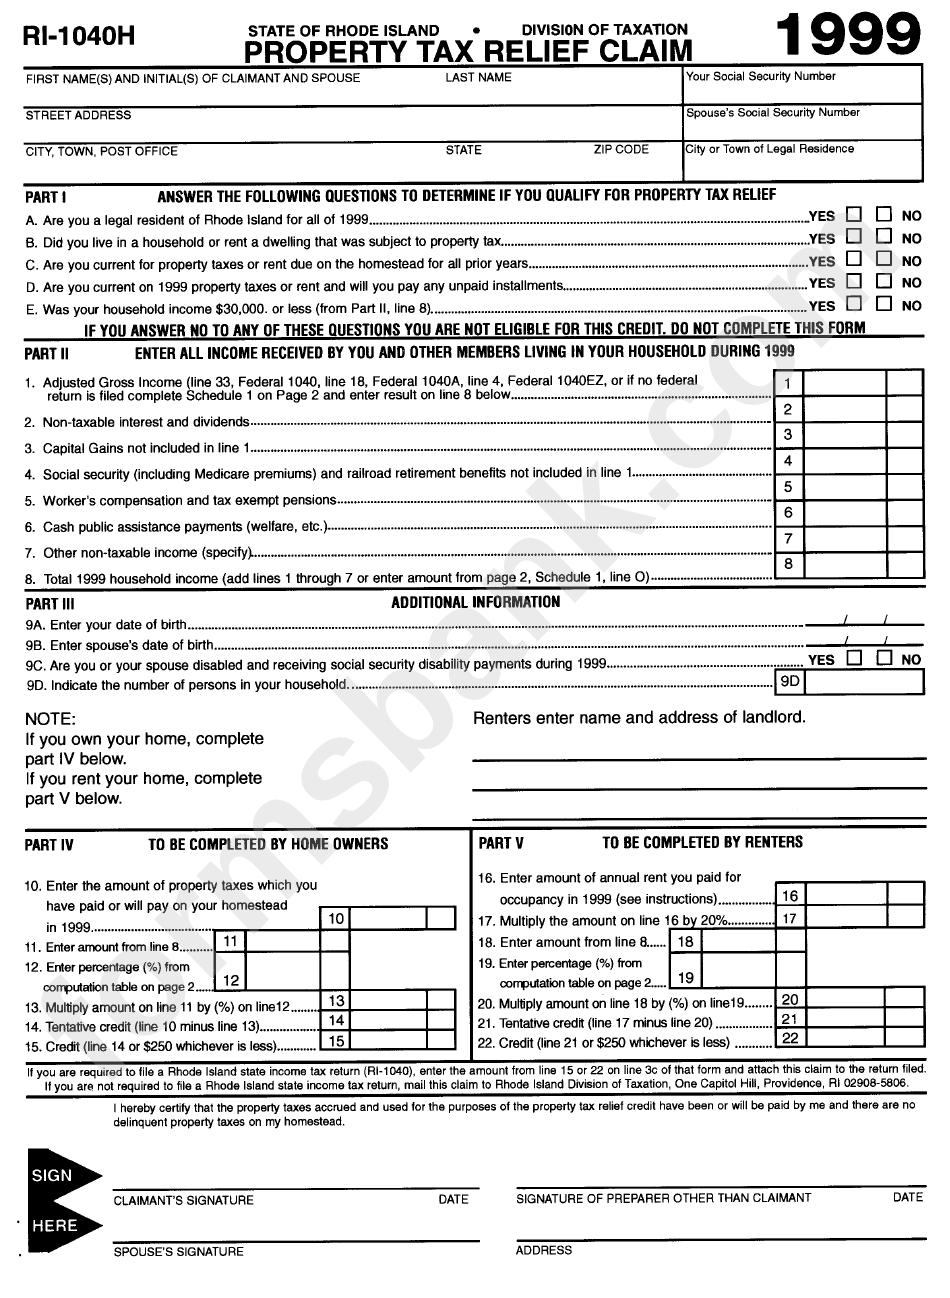 Form Ri-1040h - Property Tax Relief Claim - 1999